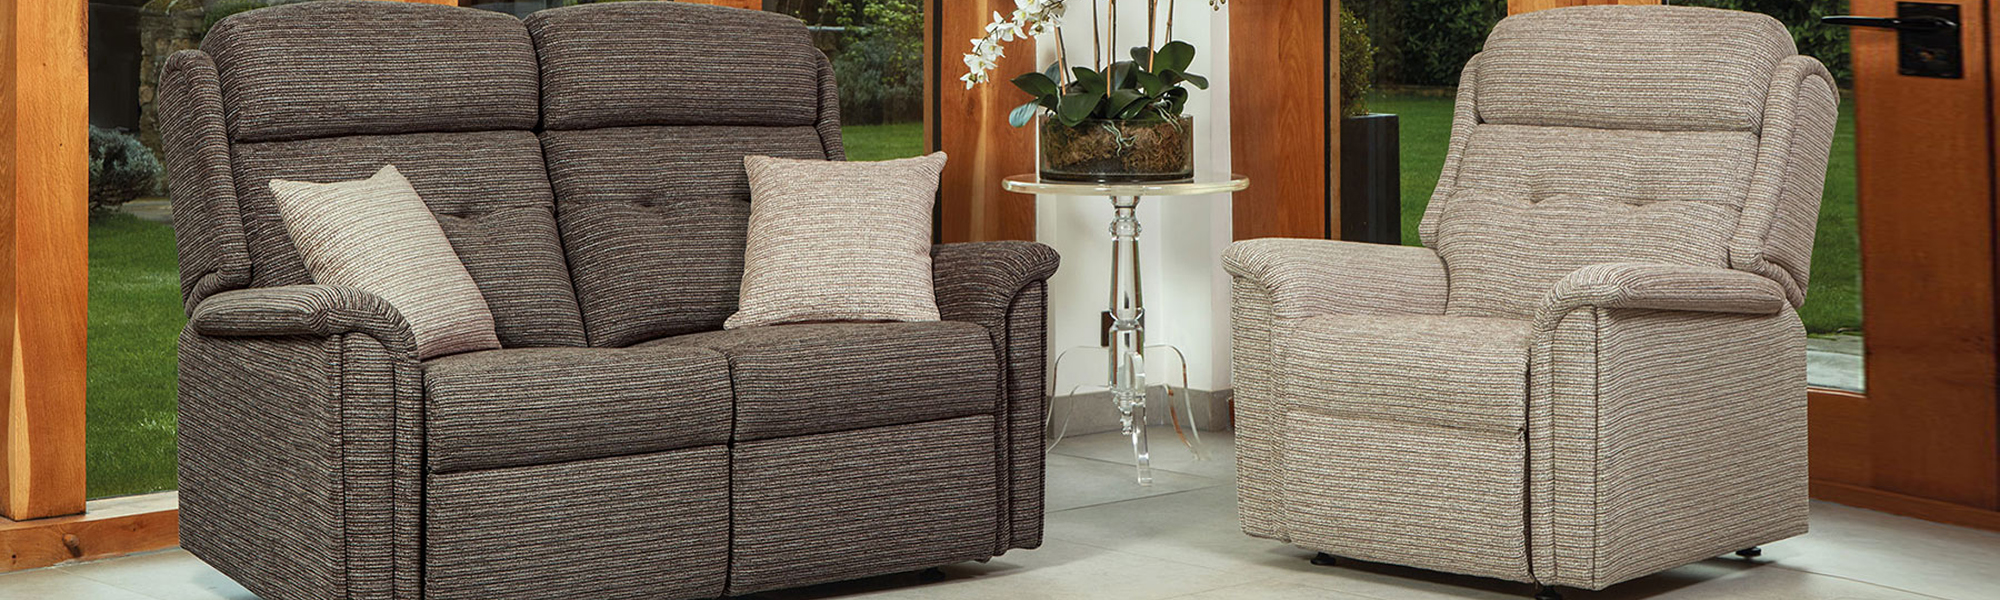 Fabric Armchairs & Cuddler Chairs